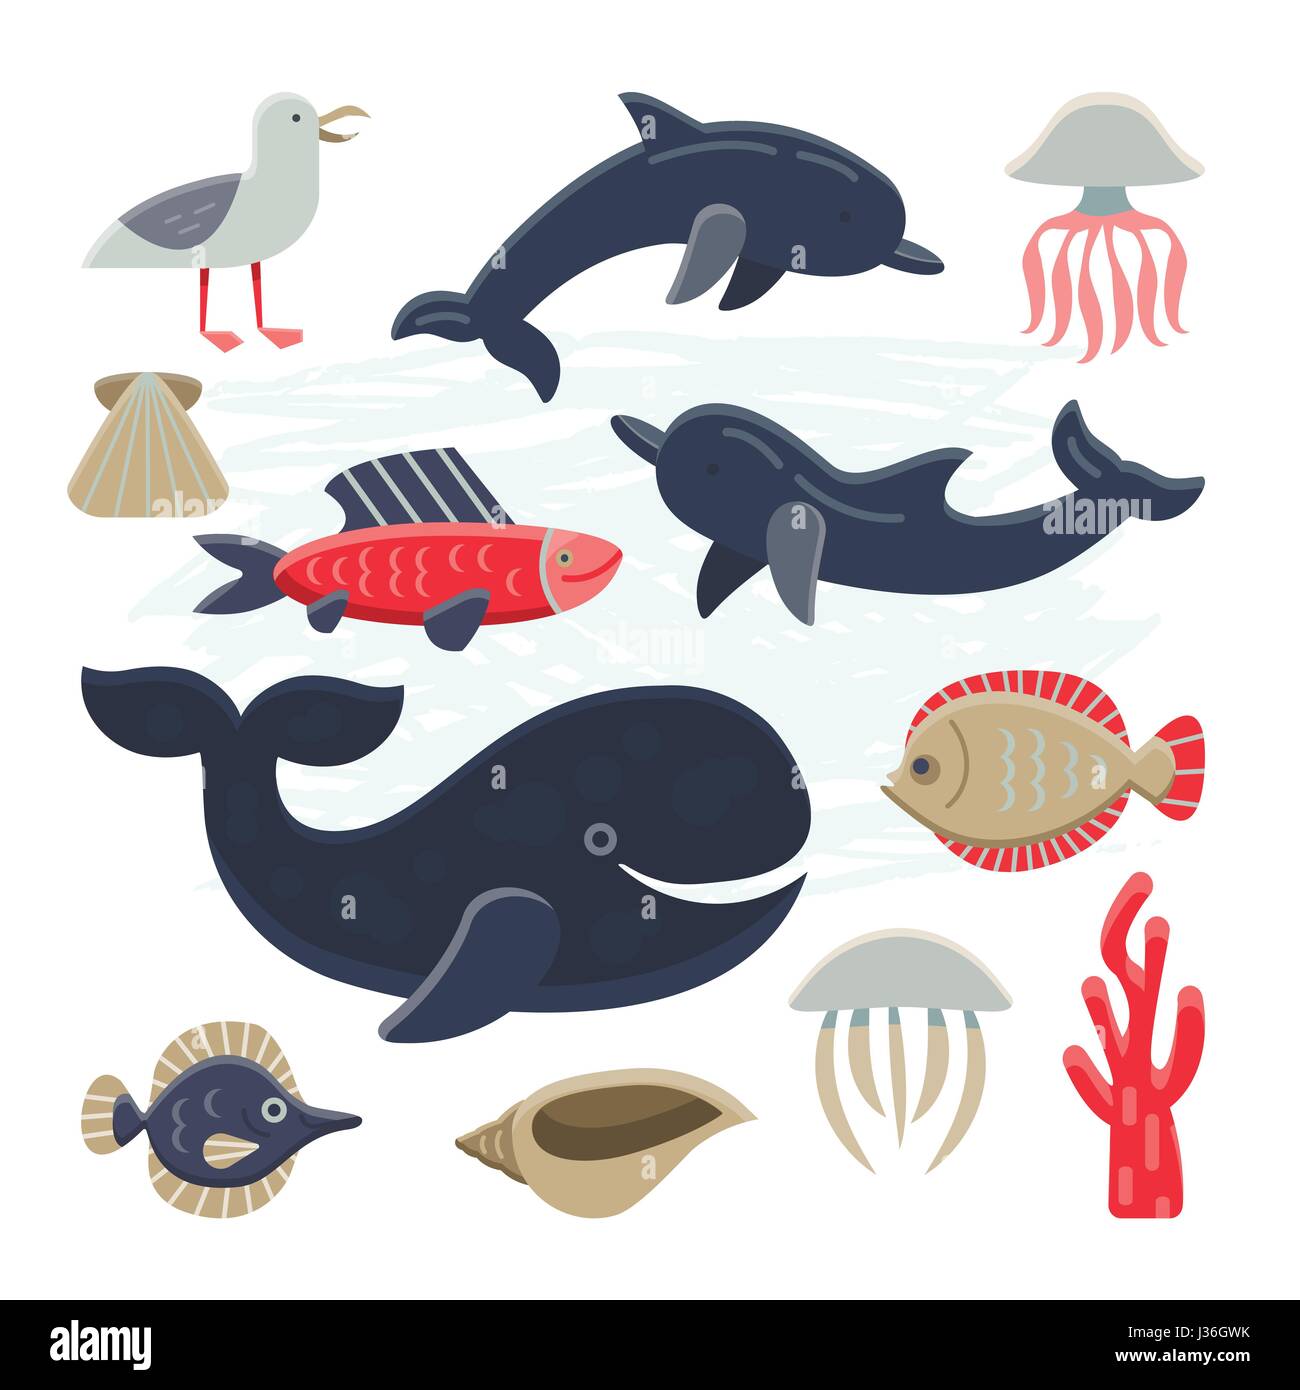 Marine life pictures collection. Easily grouped and editable elements Stock Vector